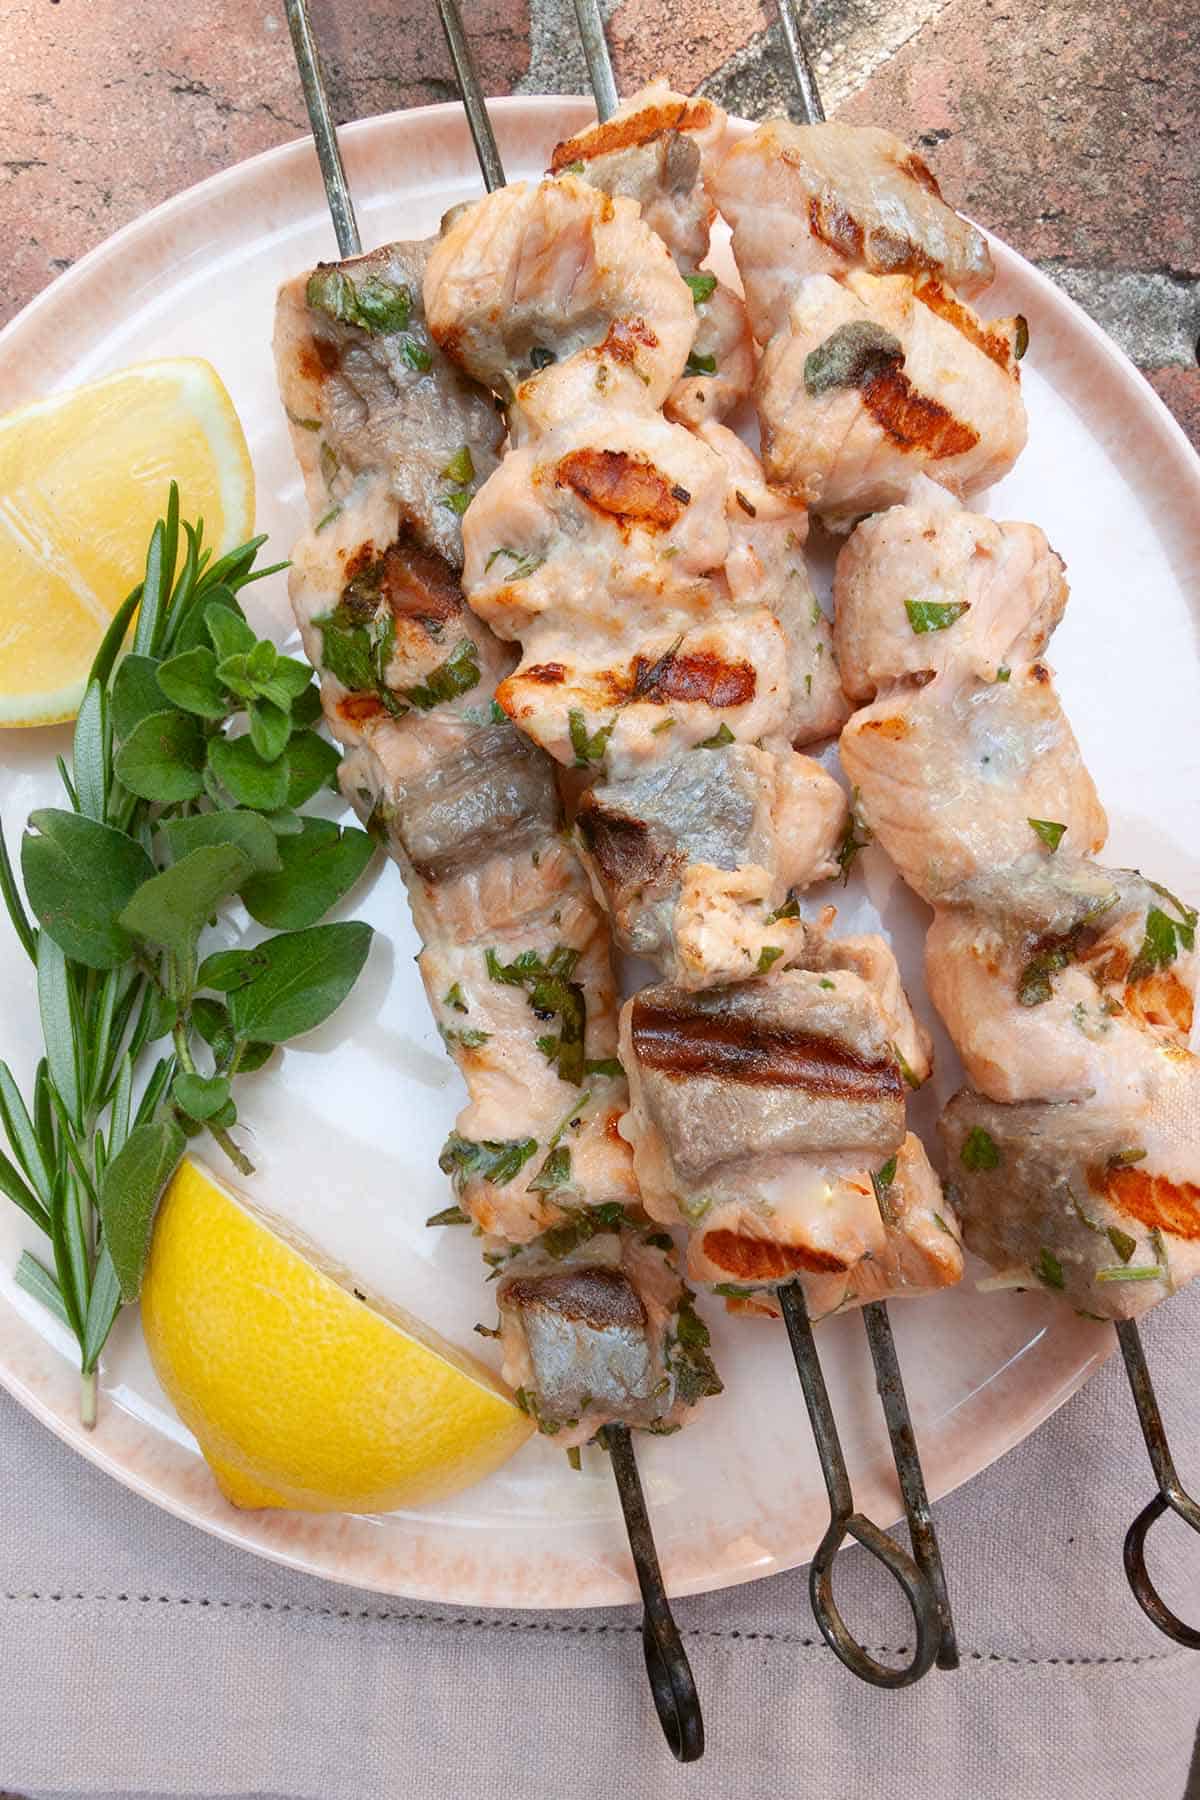 Four grilled salmon skewers on a pink plate with fresh herbs and lemon wedges.